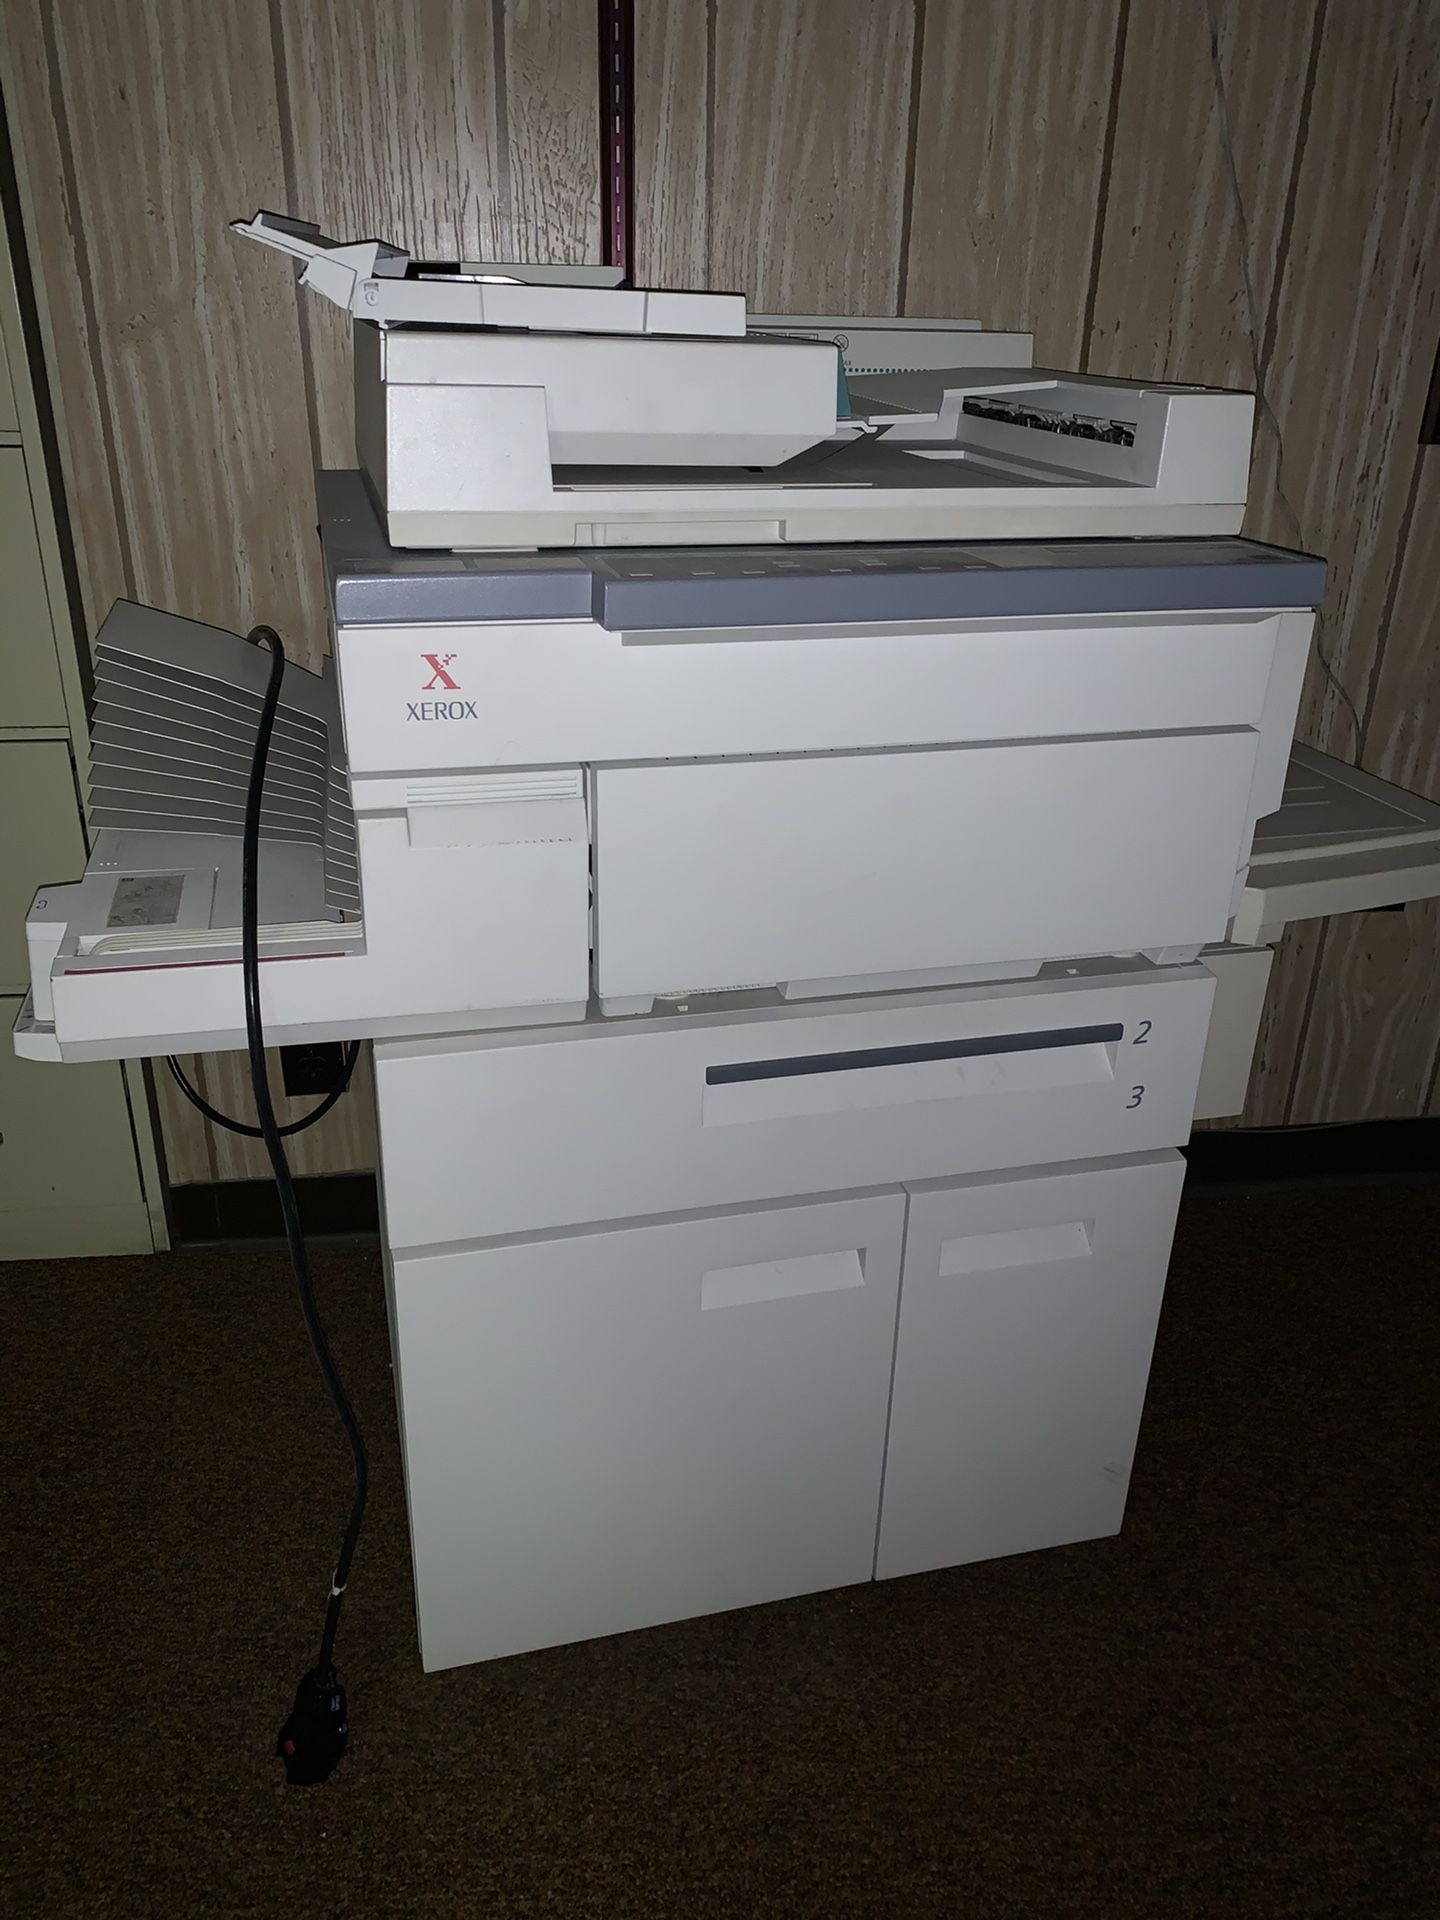 Used copier from Xerox